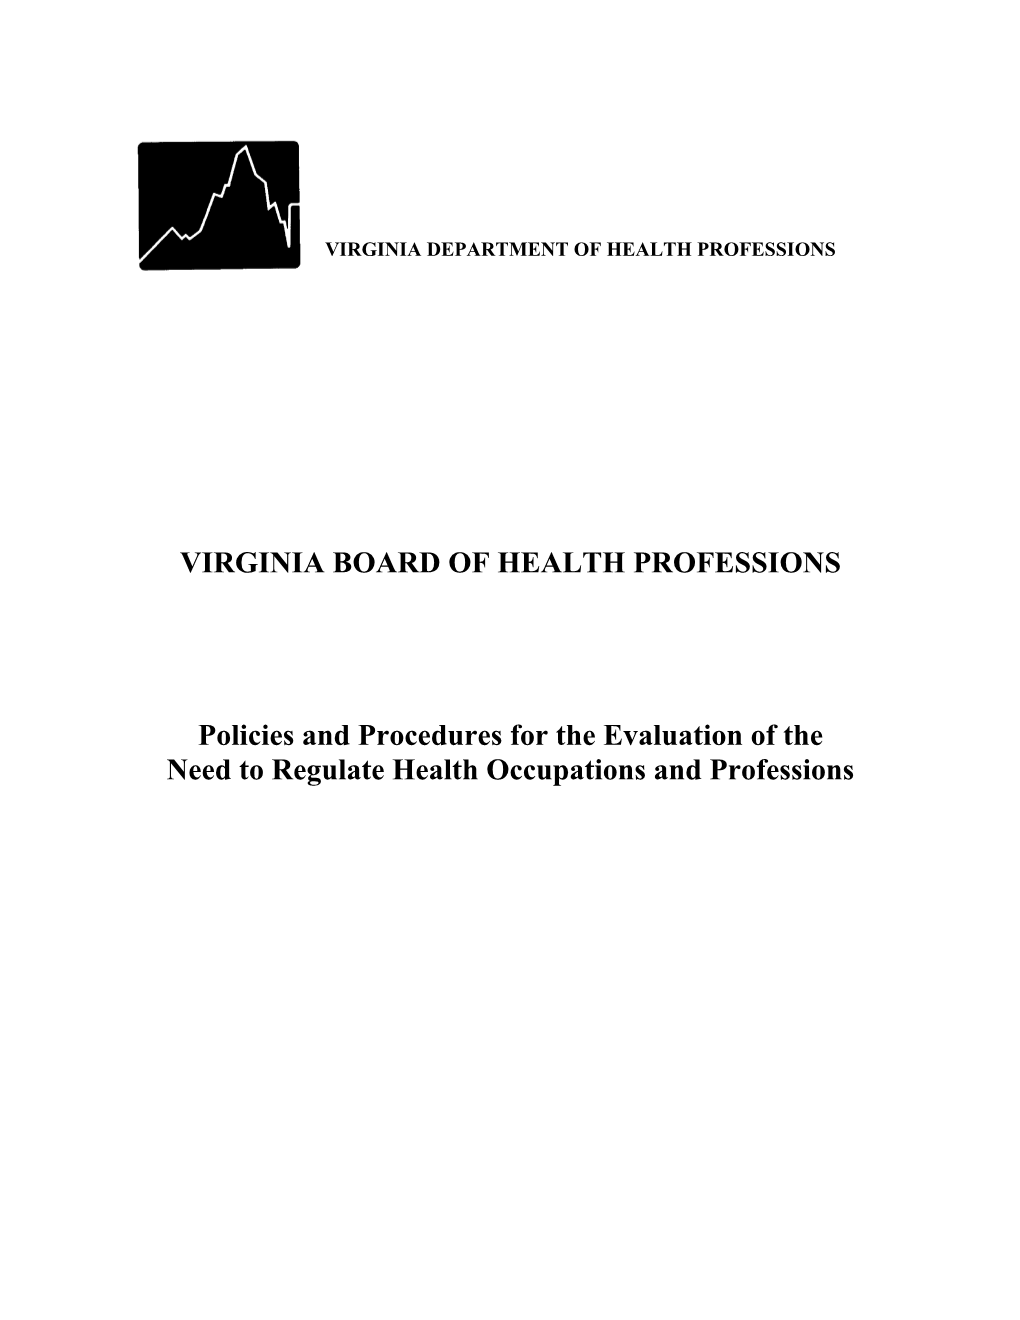 Policy & Procedure for Evaluation of Need to Regulate Health Occs & Professions